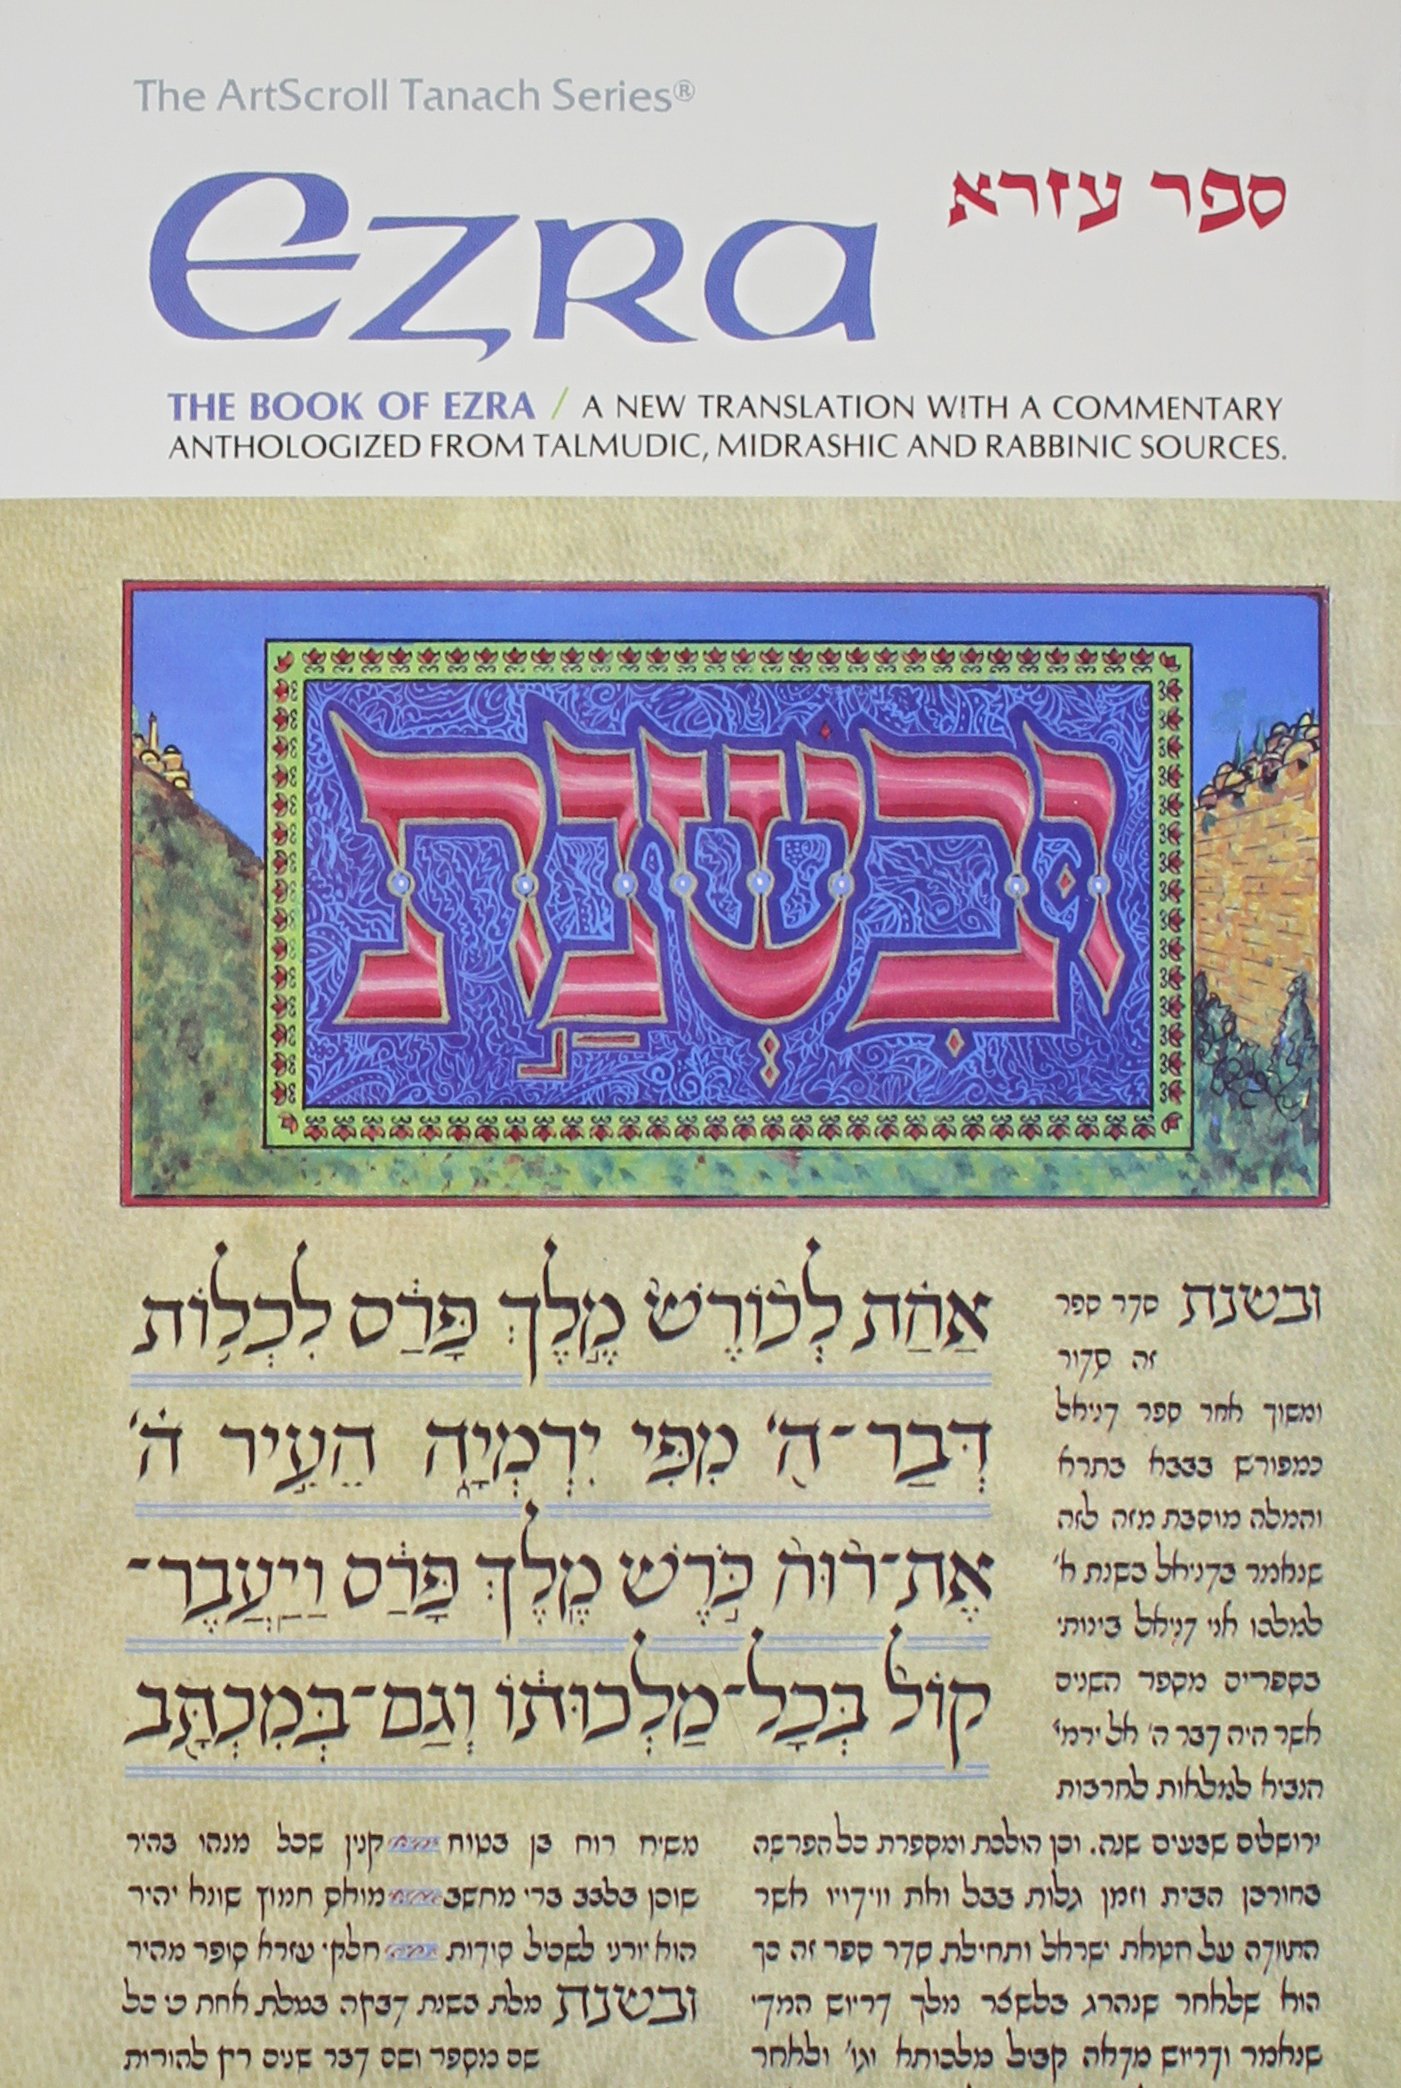 Ezra, the book of Ezra : a new translation with a commentary anthologized from Talmudic, Midrashic, and rabbinic sources